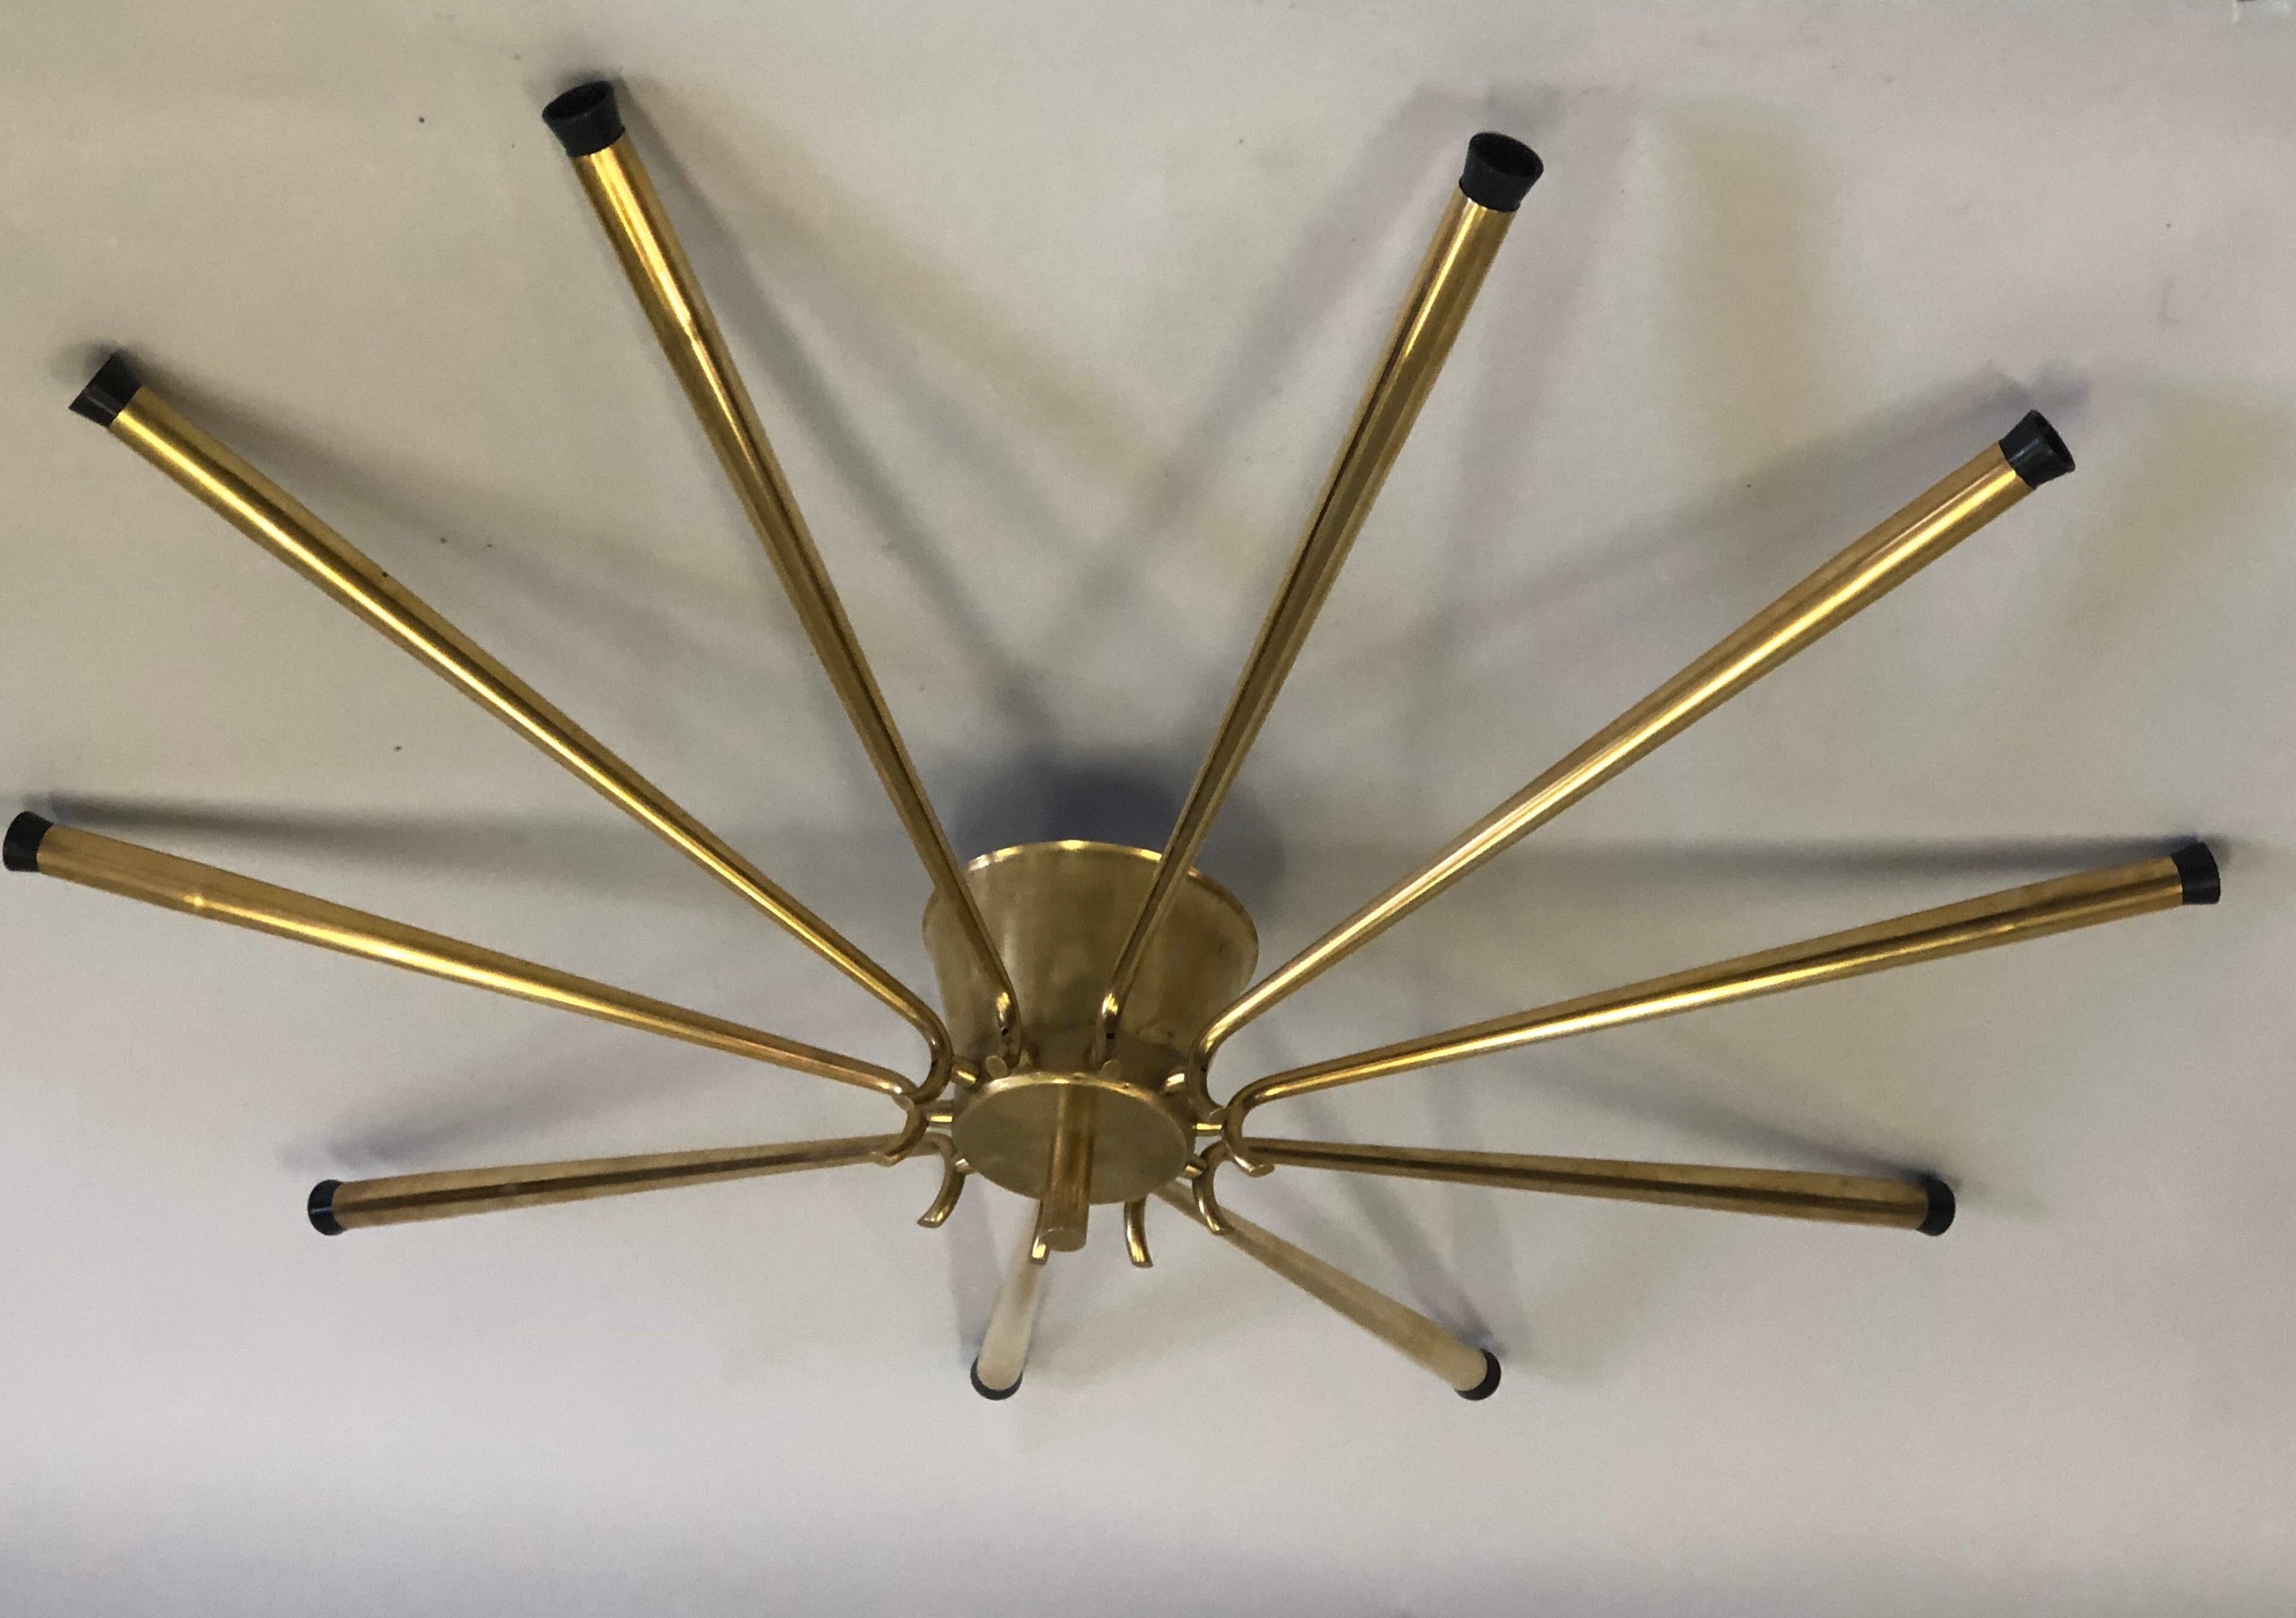 A very large Italian midcentury solid brass flush mount / pendant by Stilnovo in the form of a Star or Sunburst. 

This elegant, dramatic piece can flush mount or be suspended as a pendant. See photos for options.

Measures: Diameter without